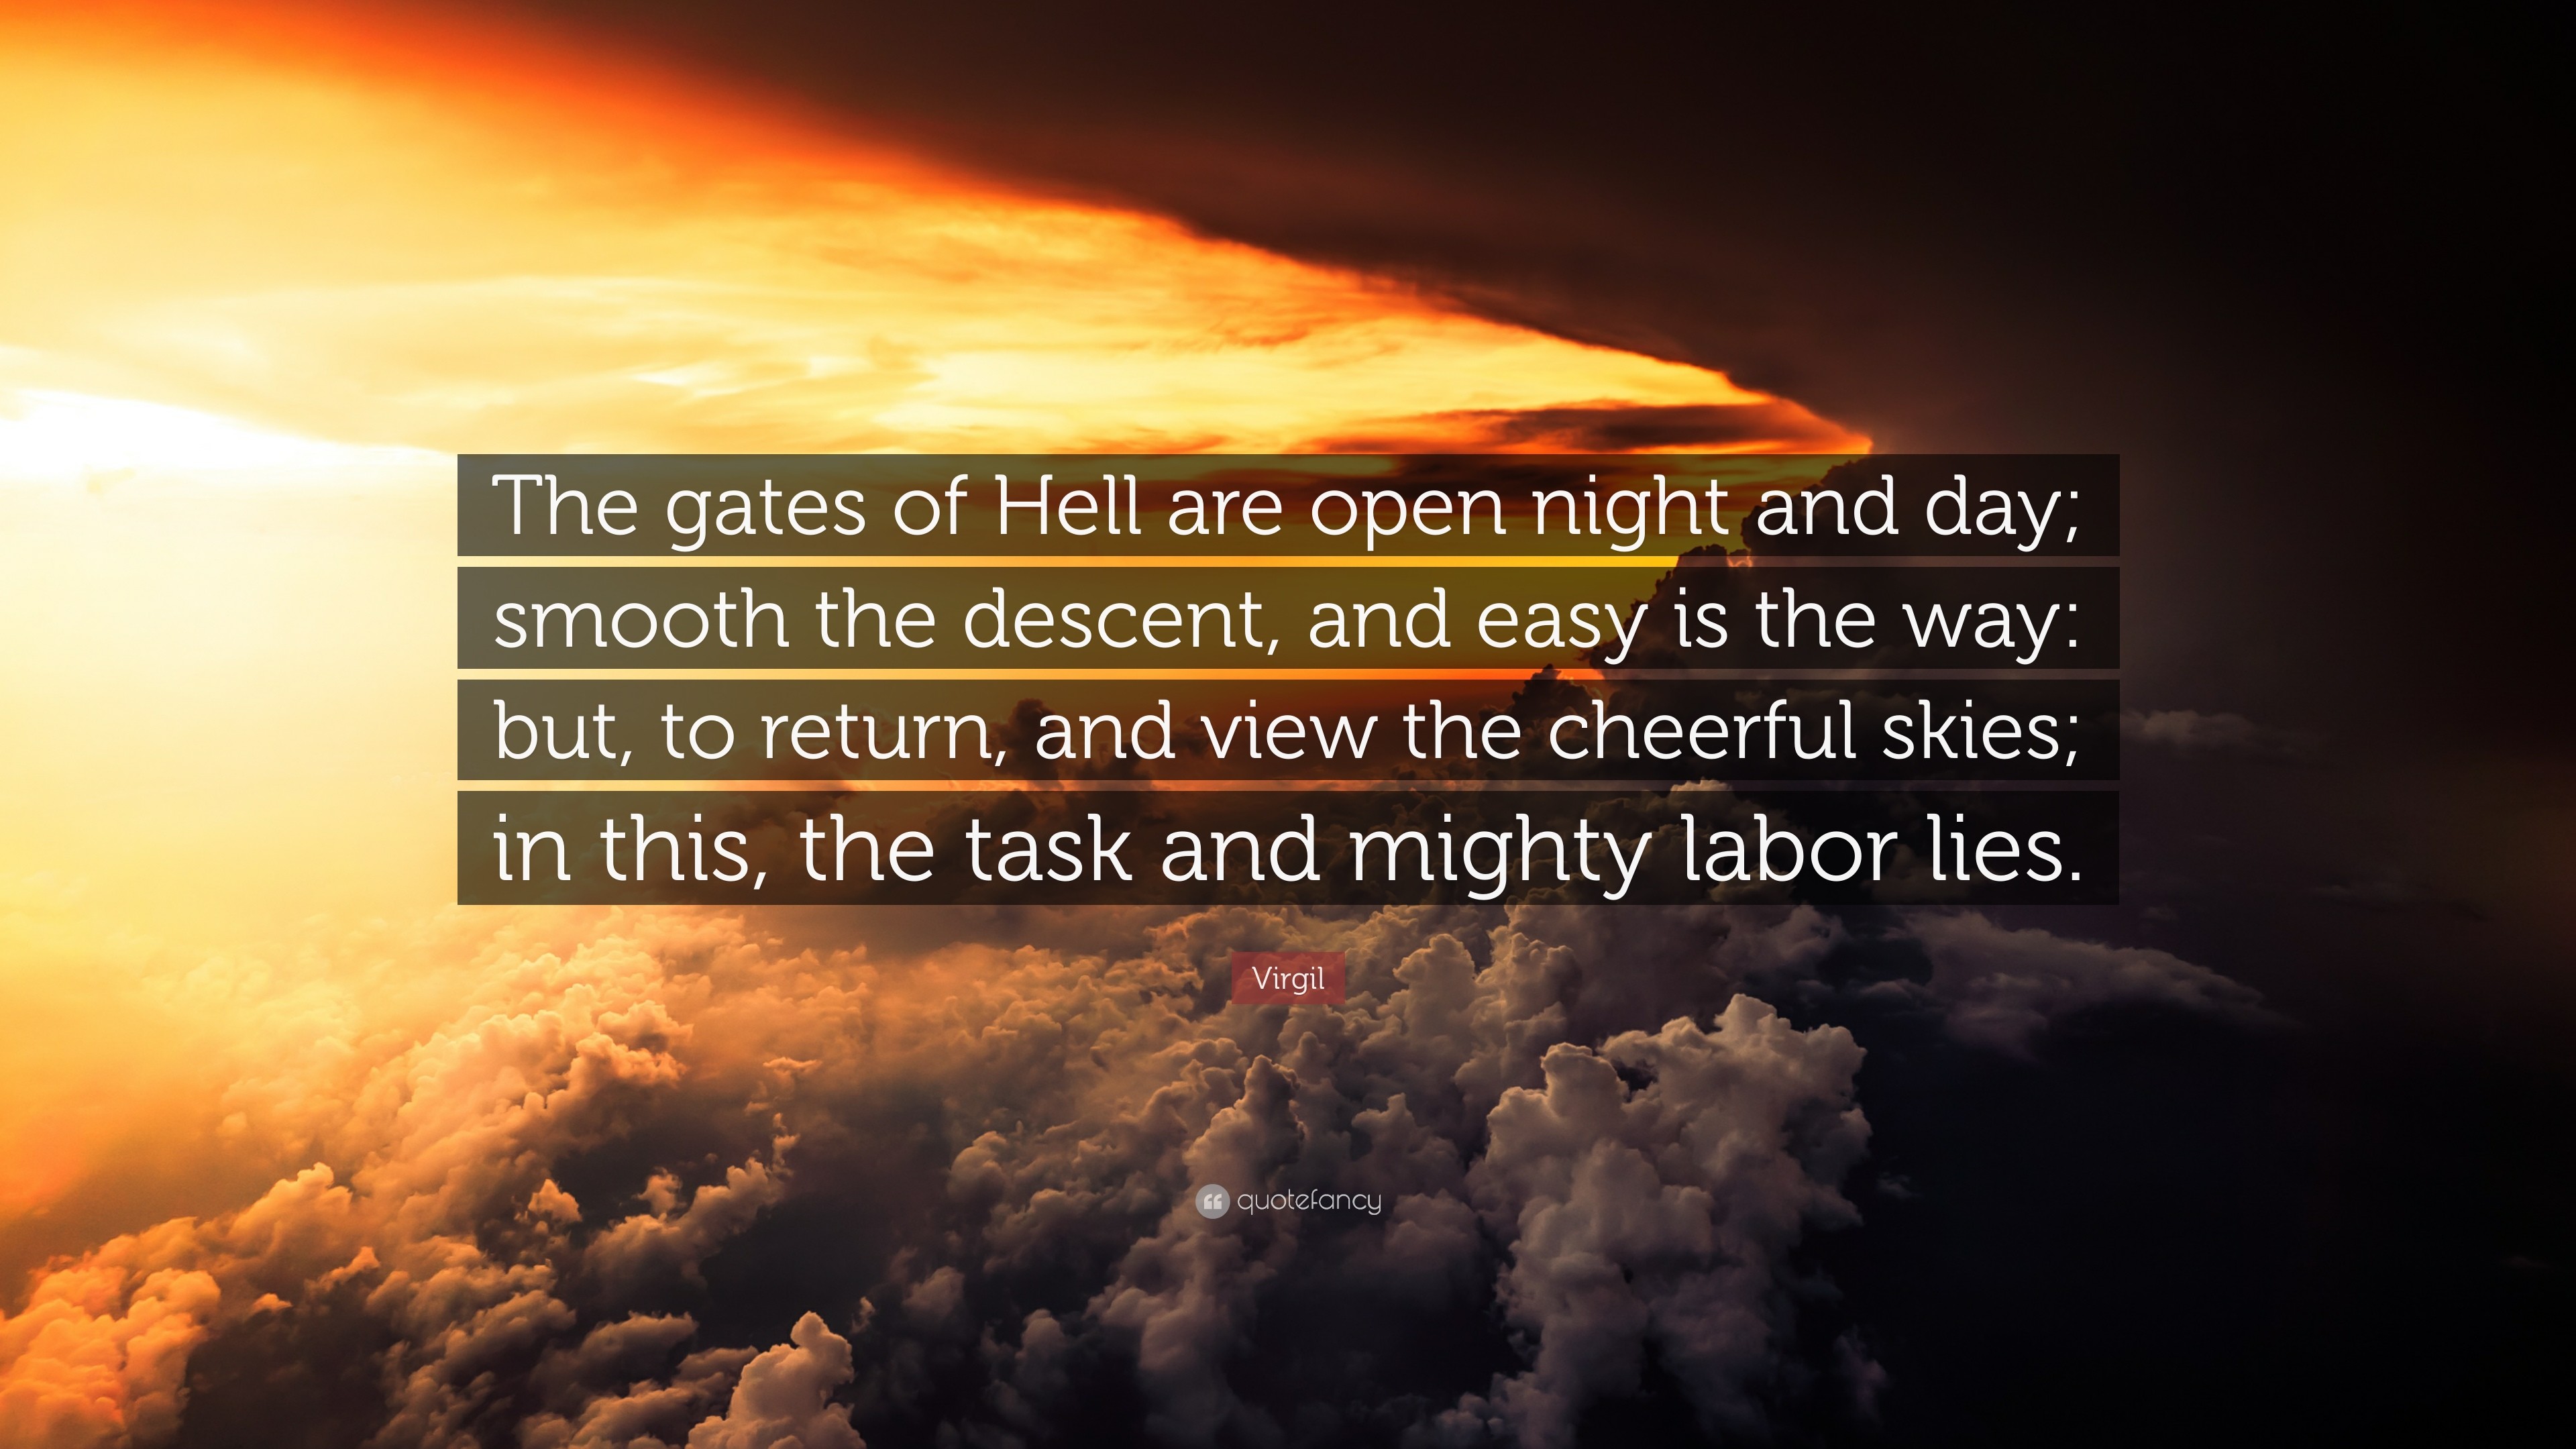 3840x2160 Virgil Quote: “The gates of Hell are open night and day; smooth the